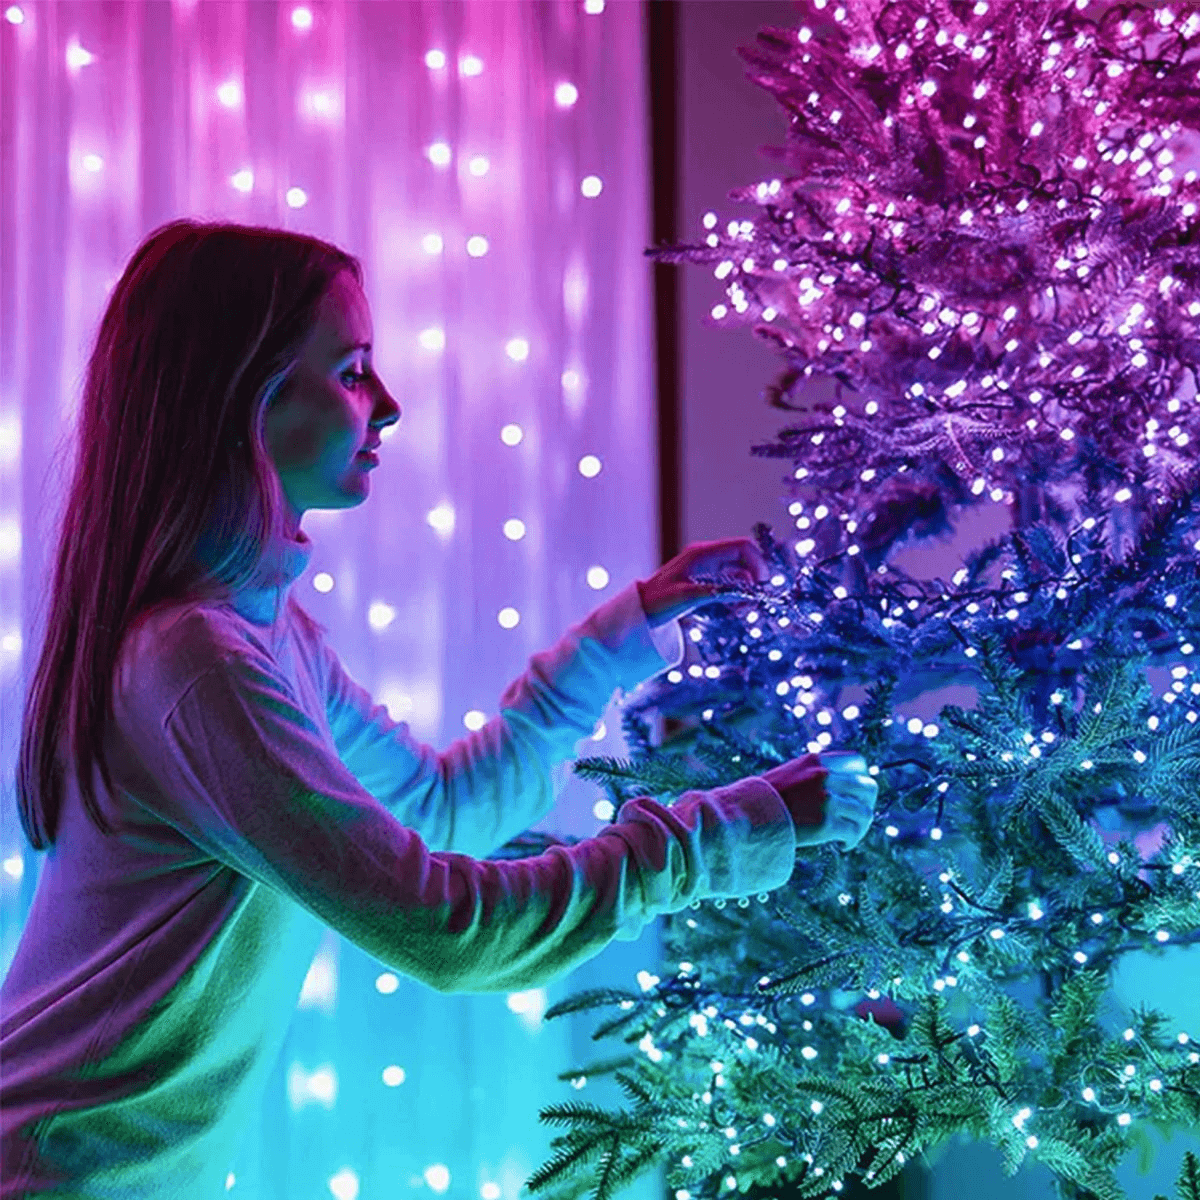 What colors are best for neon Christmas tree ornaments?